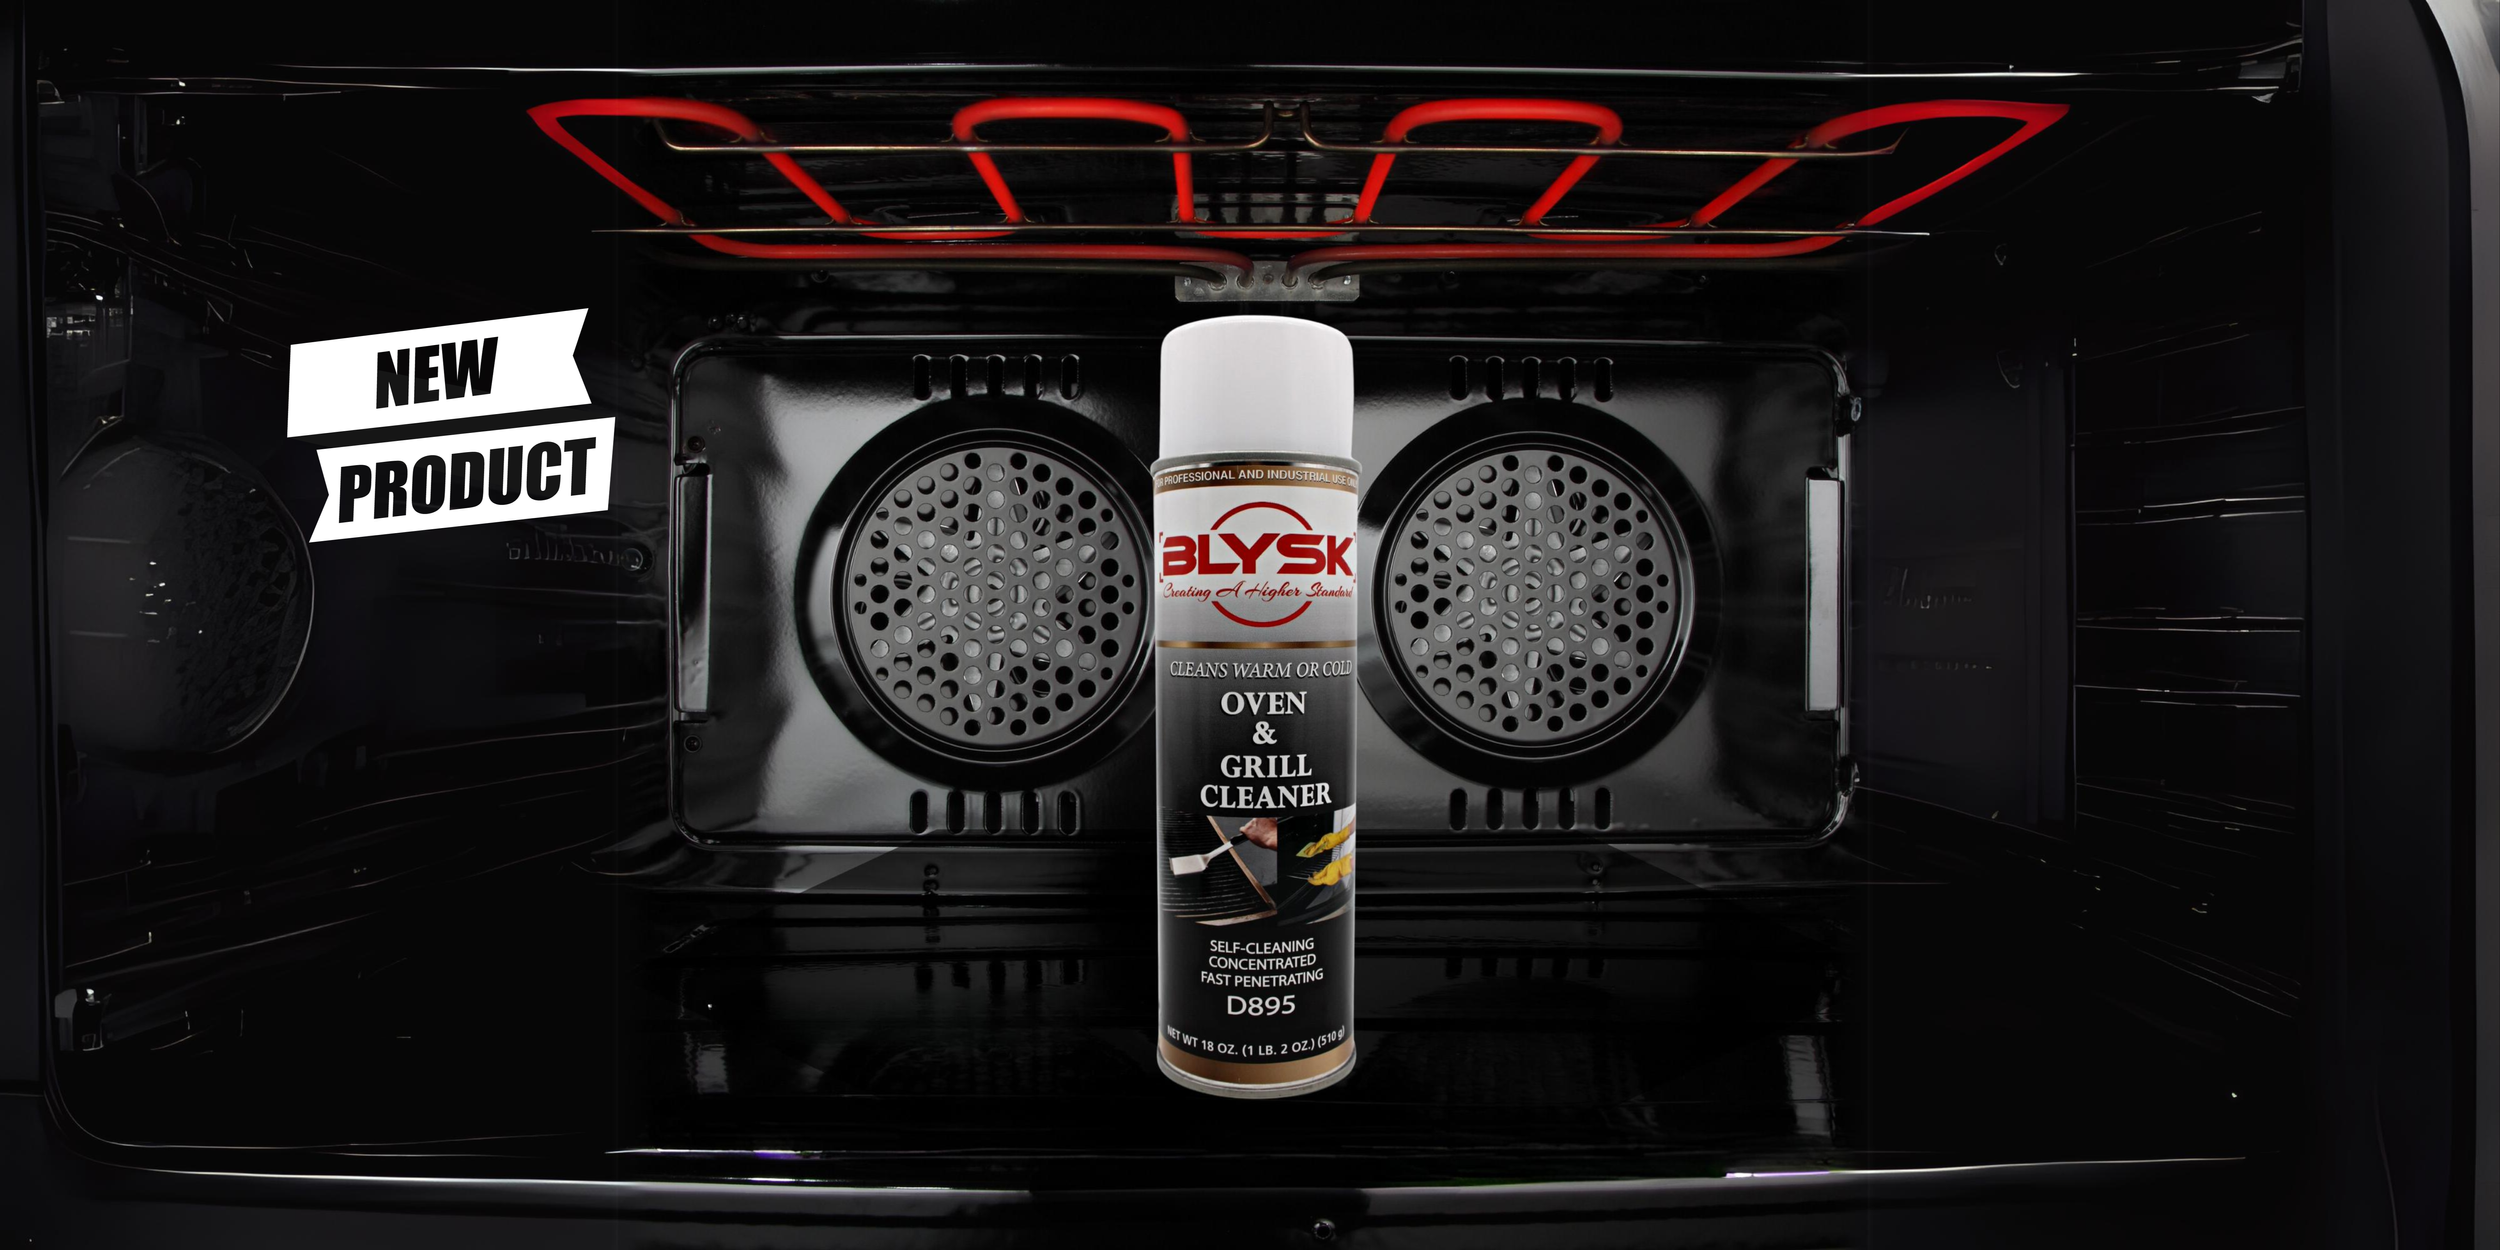 BLYSK Magic Foam Cleaner and Degreaser, 18oz - Fast Acting